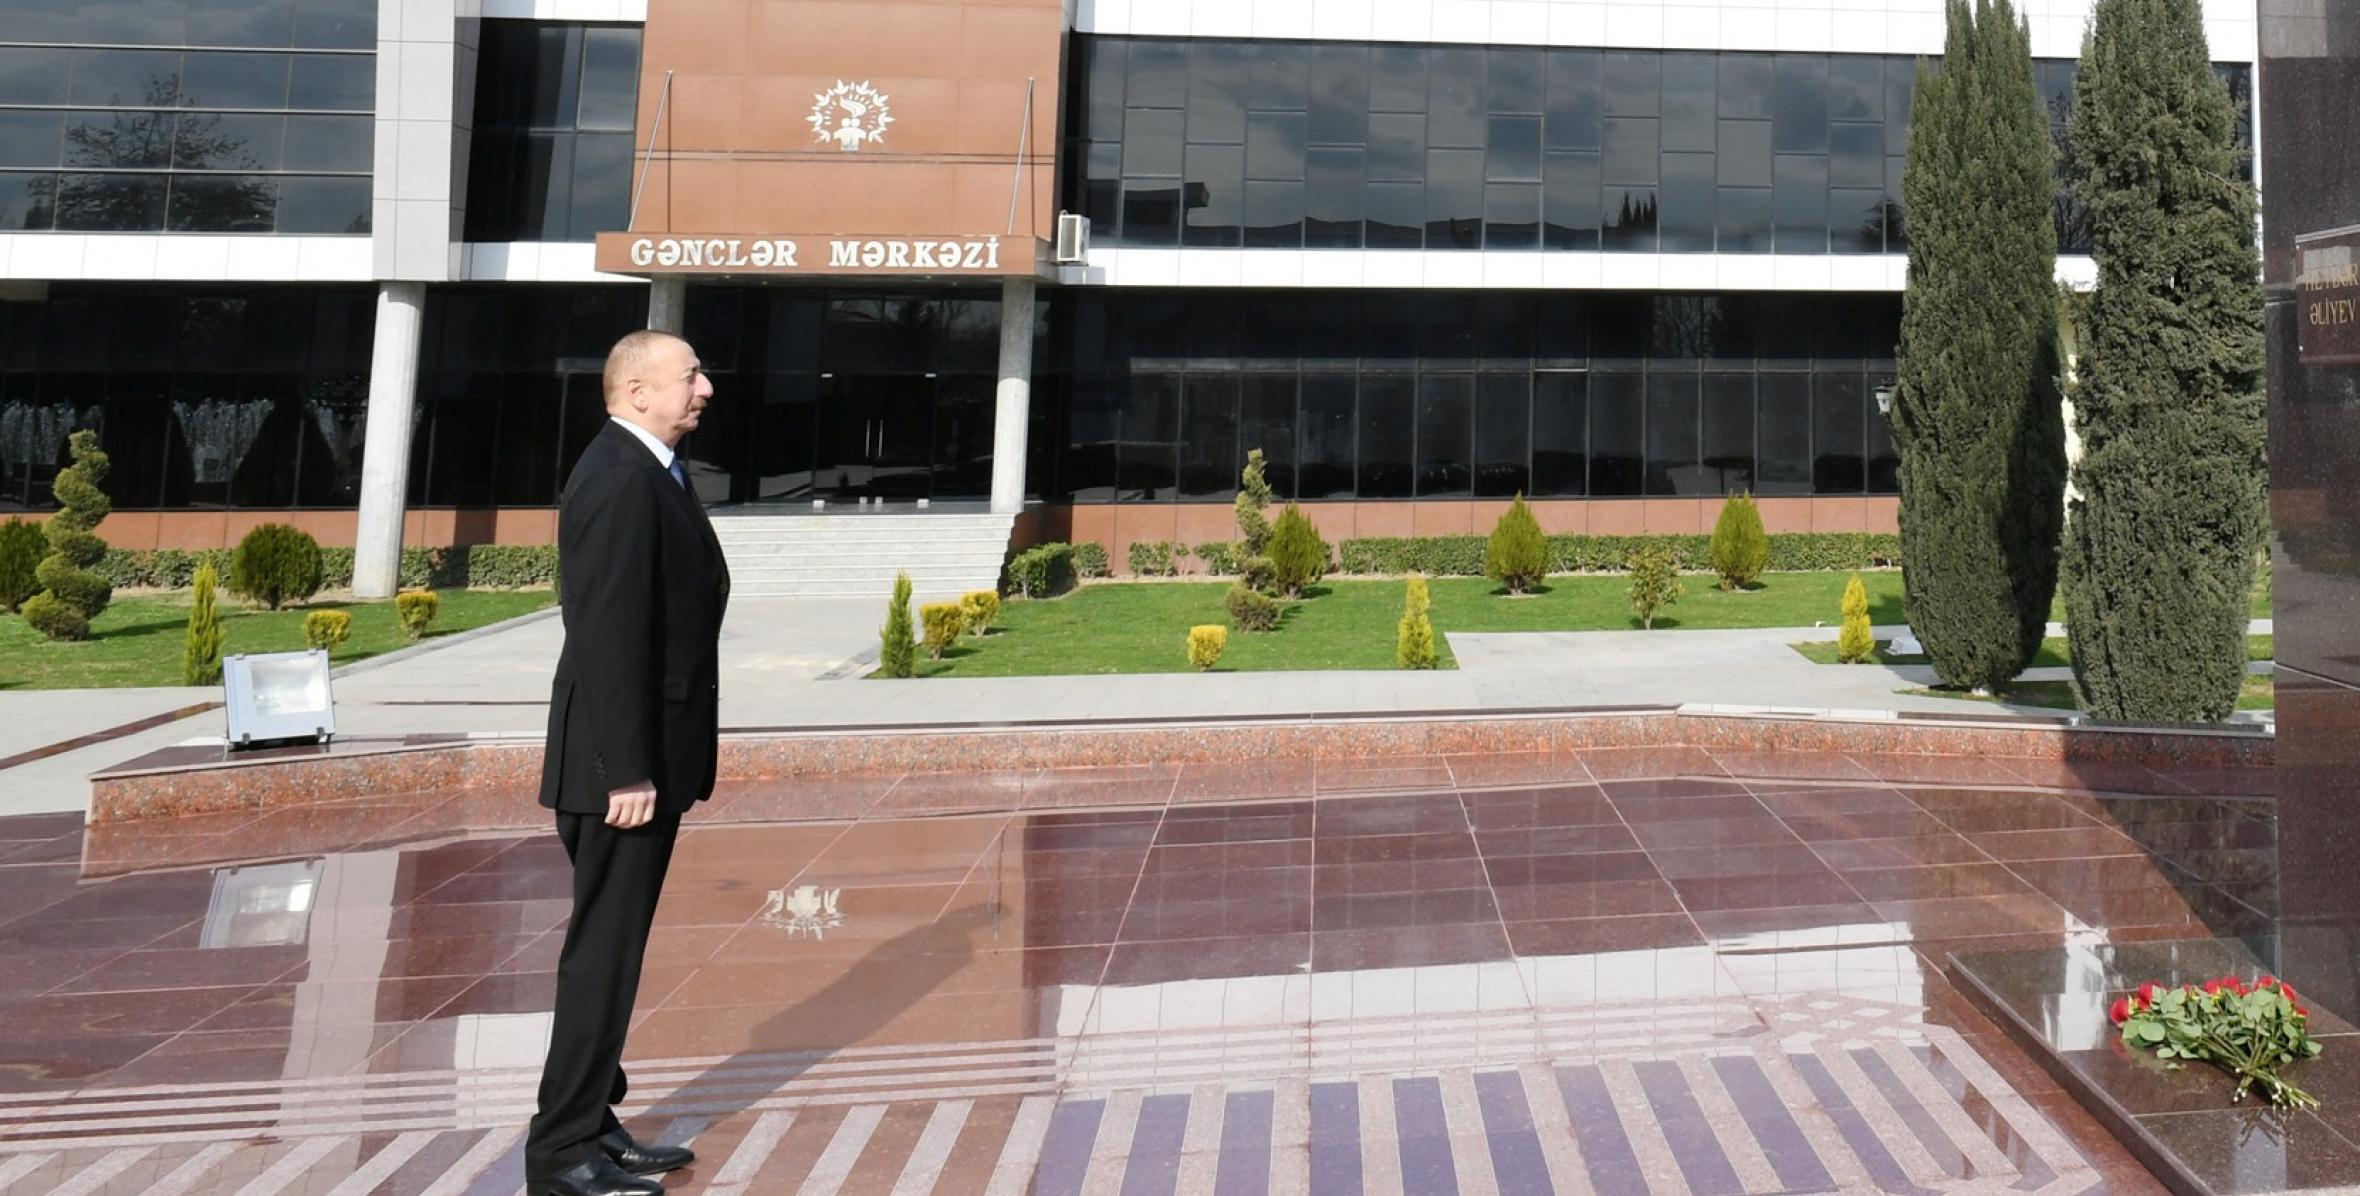 Ilham Aliyev arrived in Beylagan district for visit